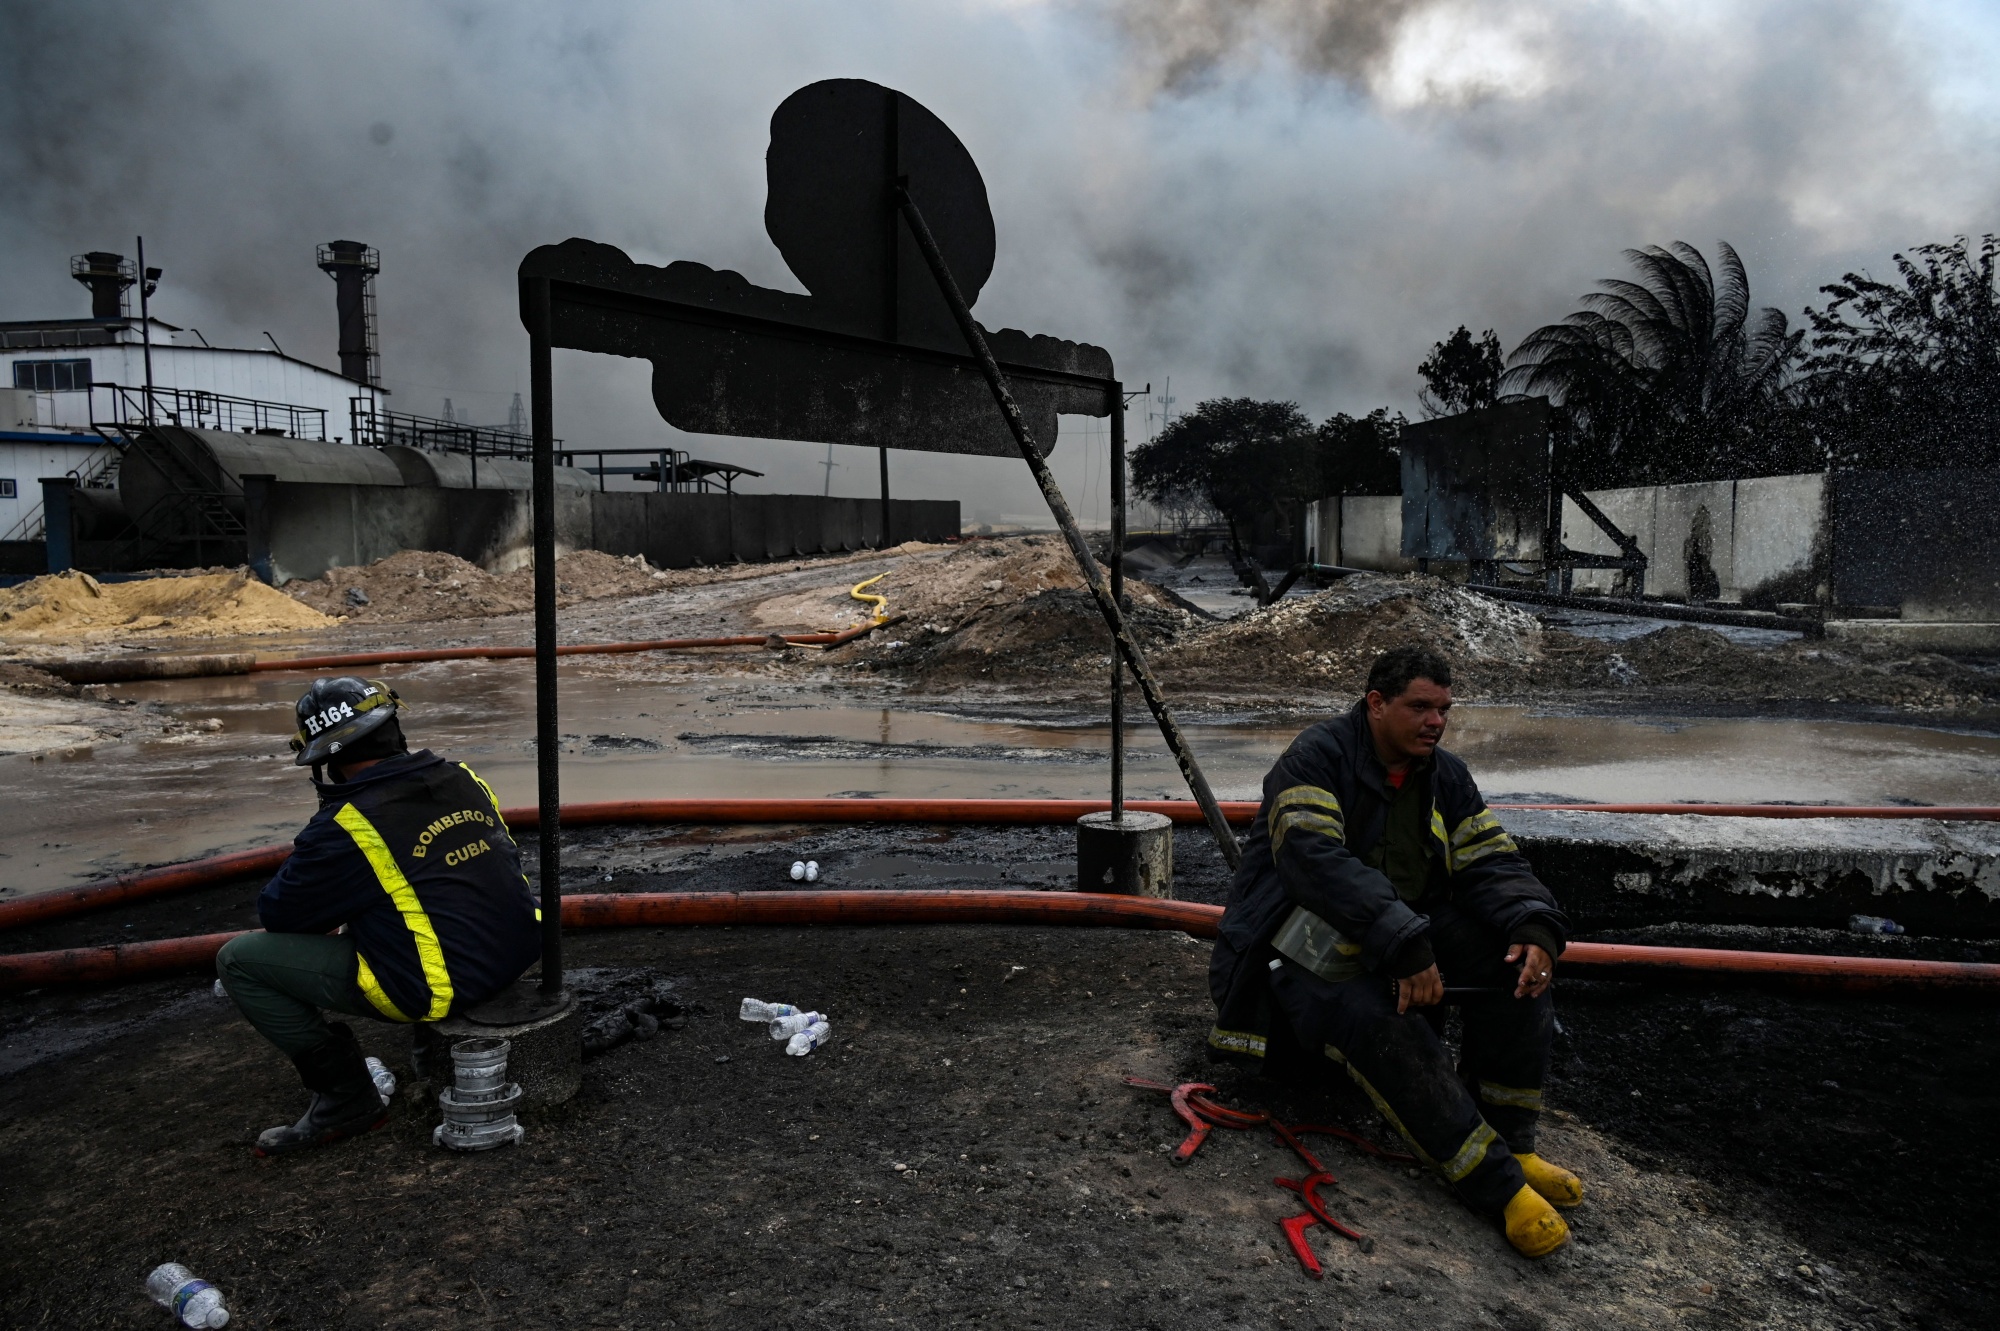 Firefighters rest in an area where a massive fire at a fuel depot occurred in Matanzas, Cuba, on August 9.